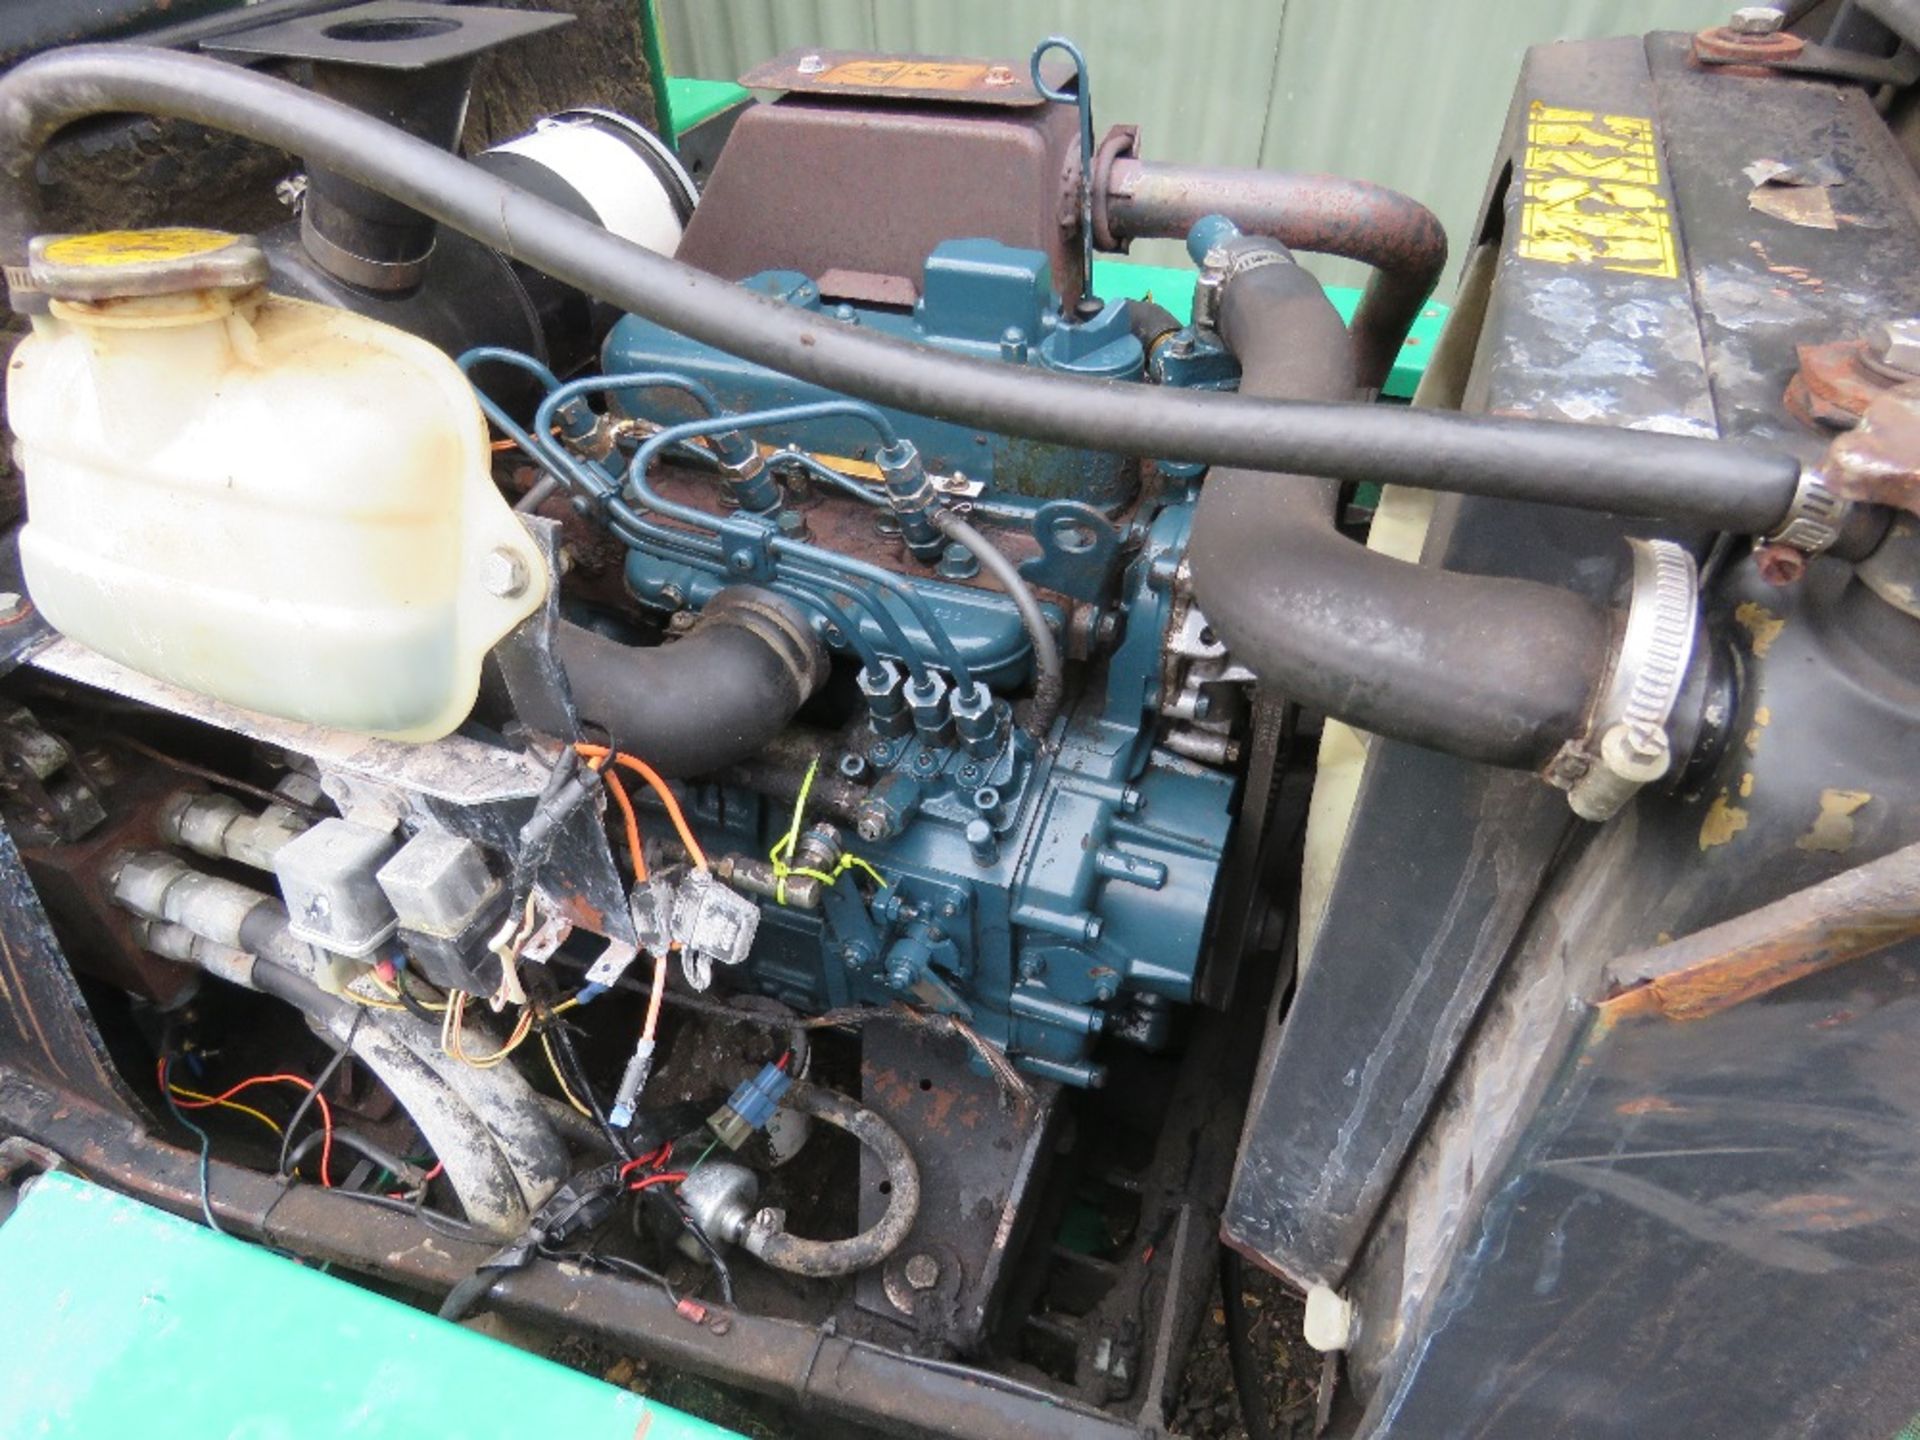 RANSOMES 213 TRIPLE RIDE ON CYLINDER MOWER WITH KUBOTA ENGINE. WHEN TESTED WAS SEEN TO RUN, DRIVE, M - Image 10 of 10